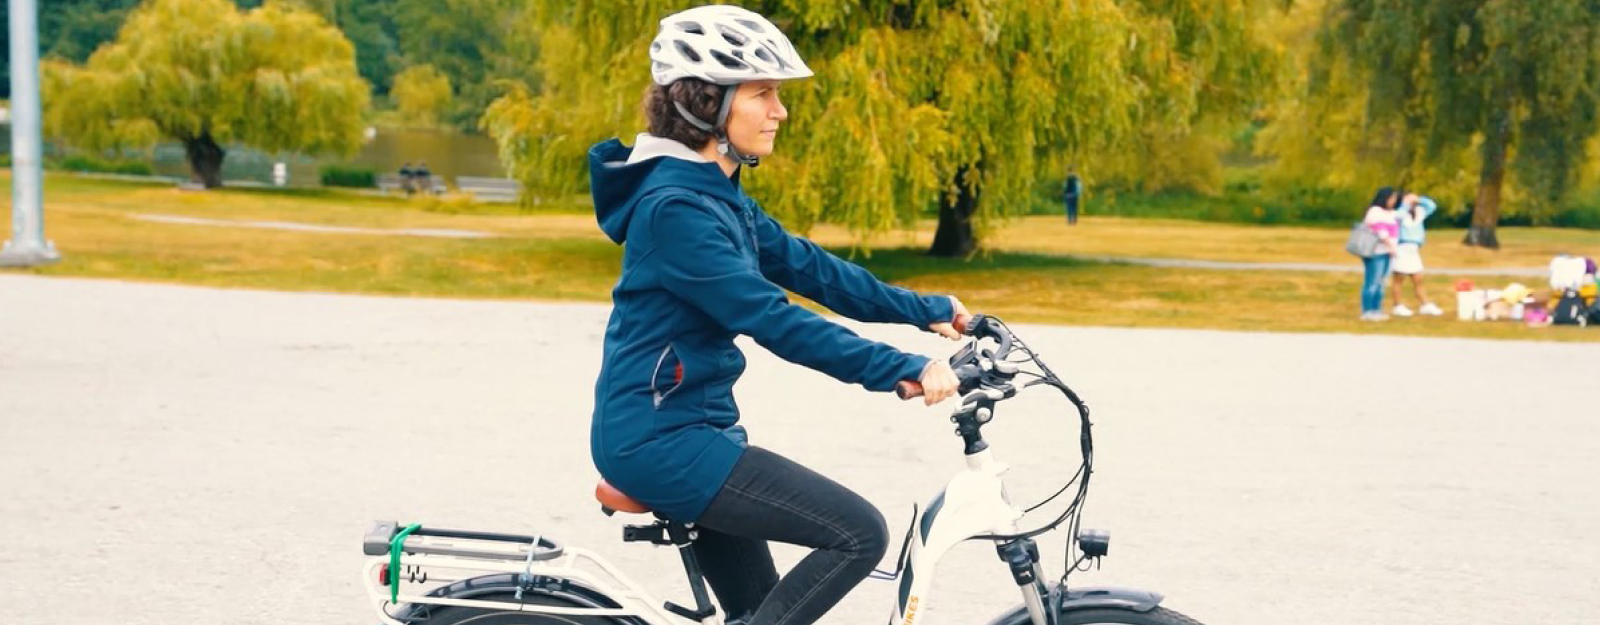 A white woman in her 40s rides an e-bike on a gravel field at Trout Lake.